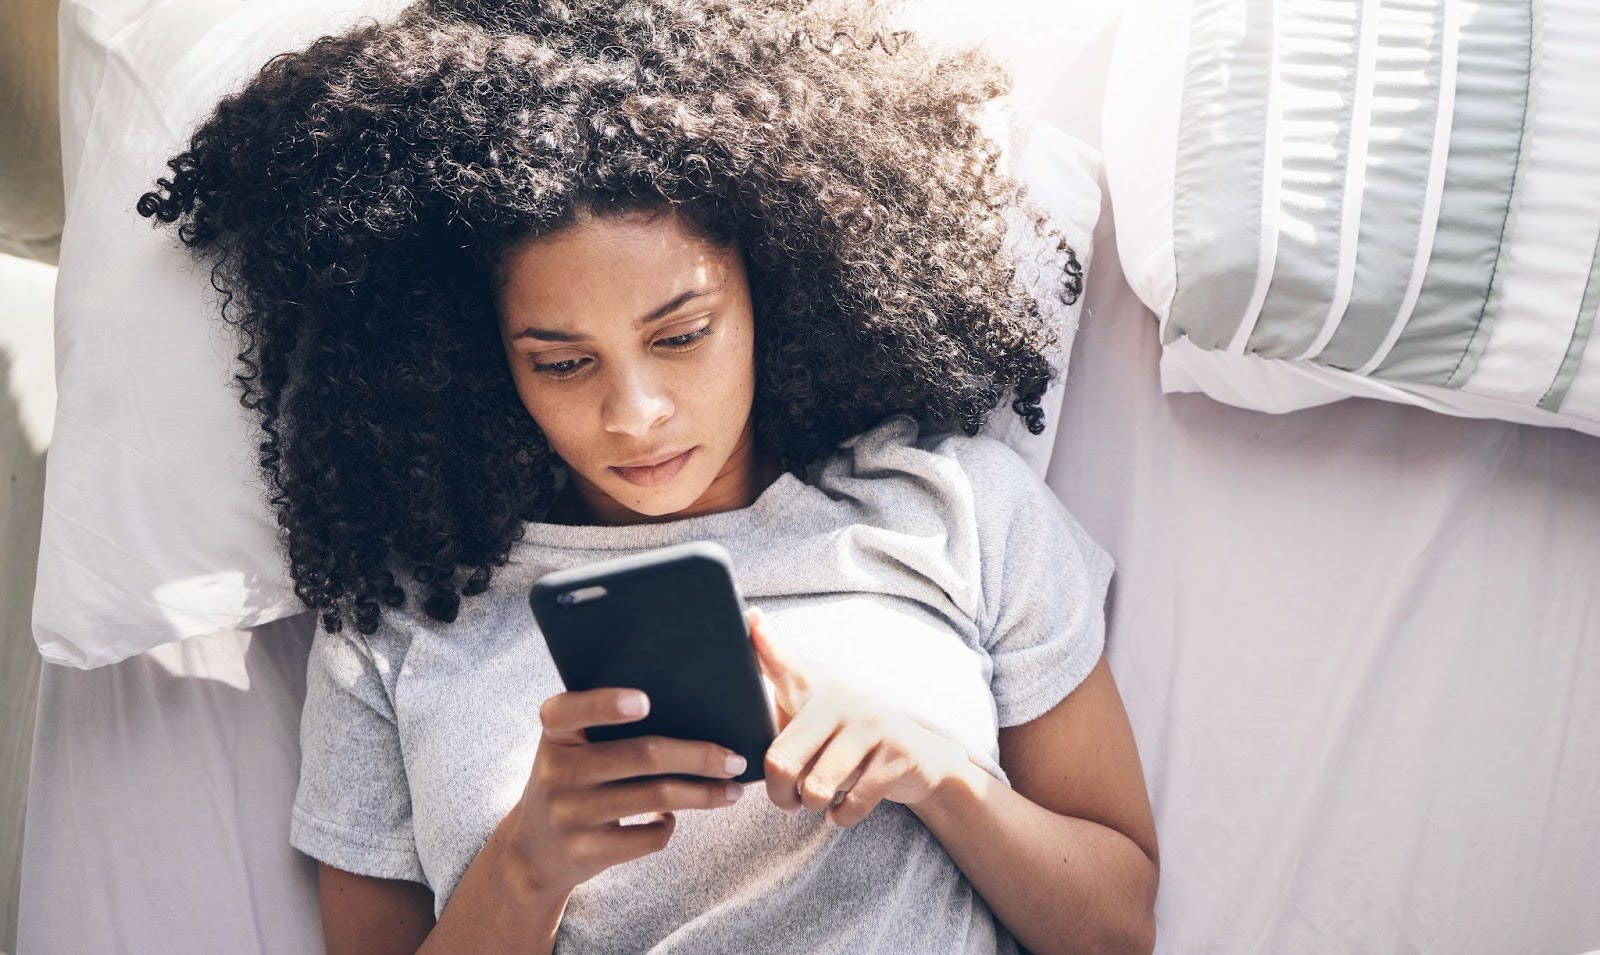 A woman with curly hair lying on a bed and looking at her phone.